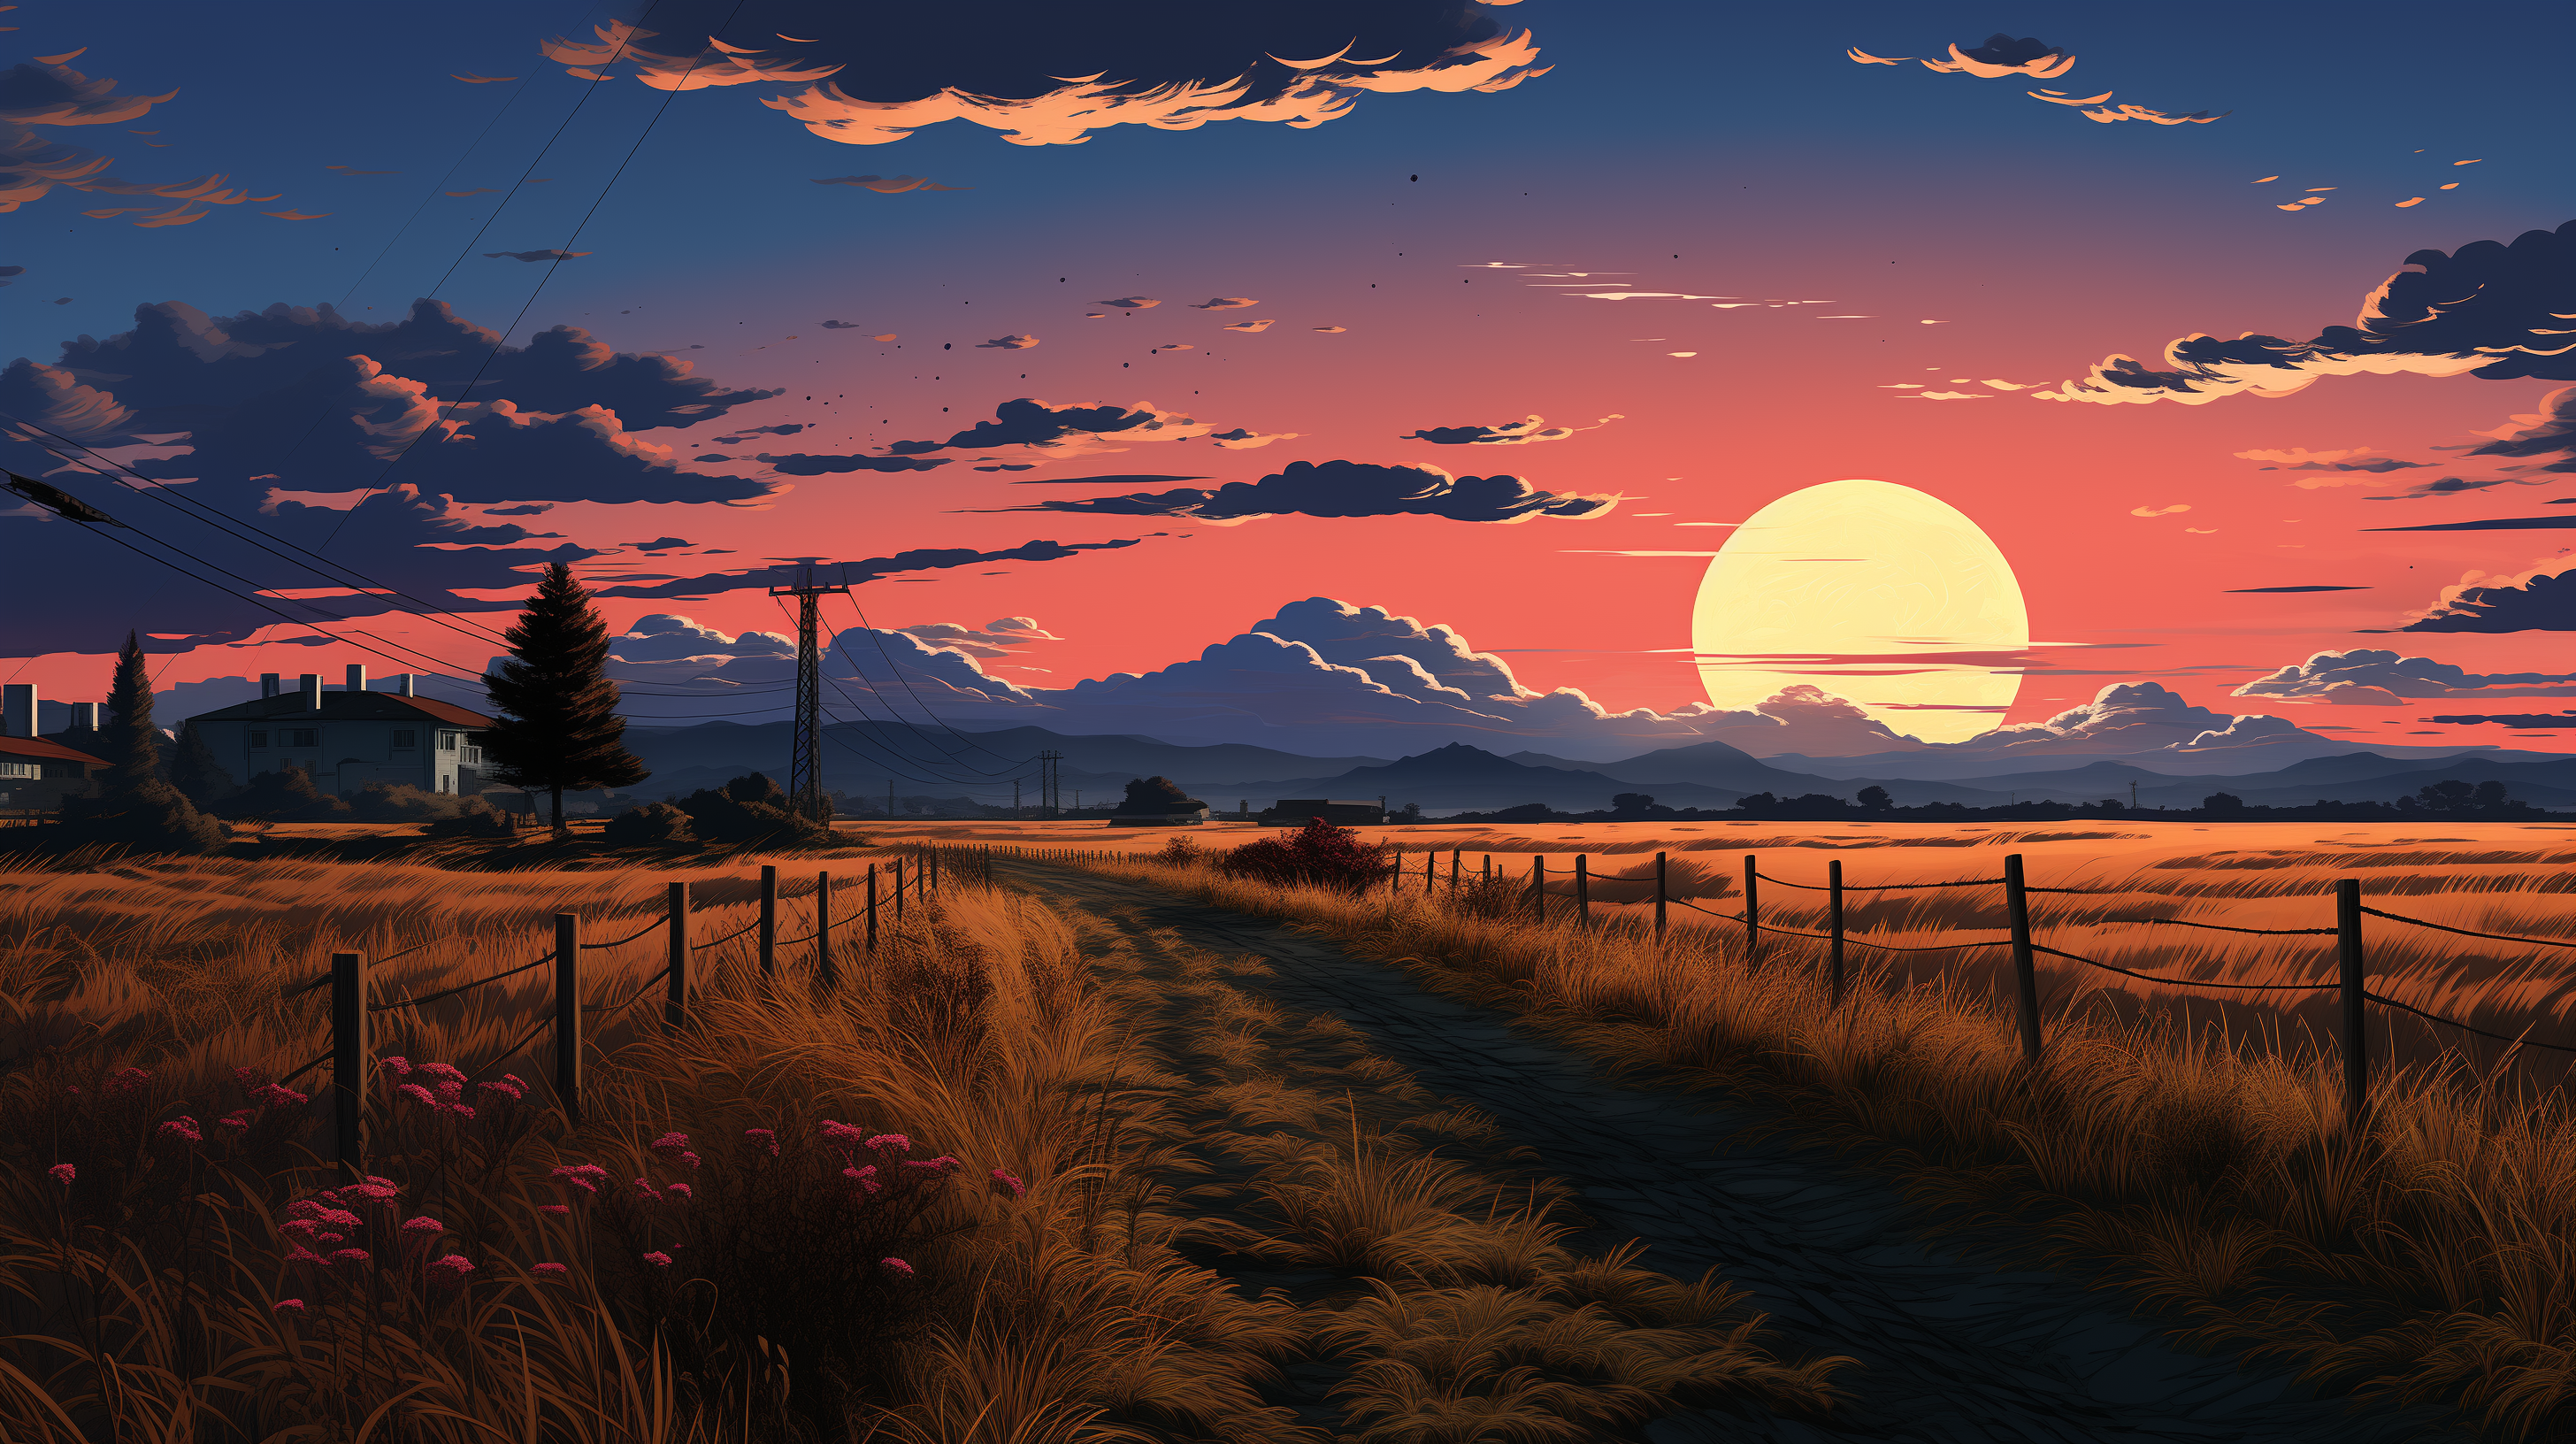 HD desktop wallpaper of a picturesque countryside landscape at sunset with expansive sky and vivid colors.